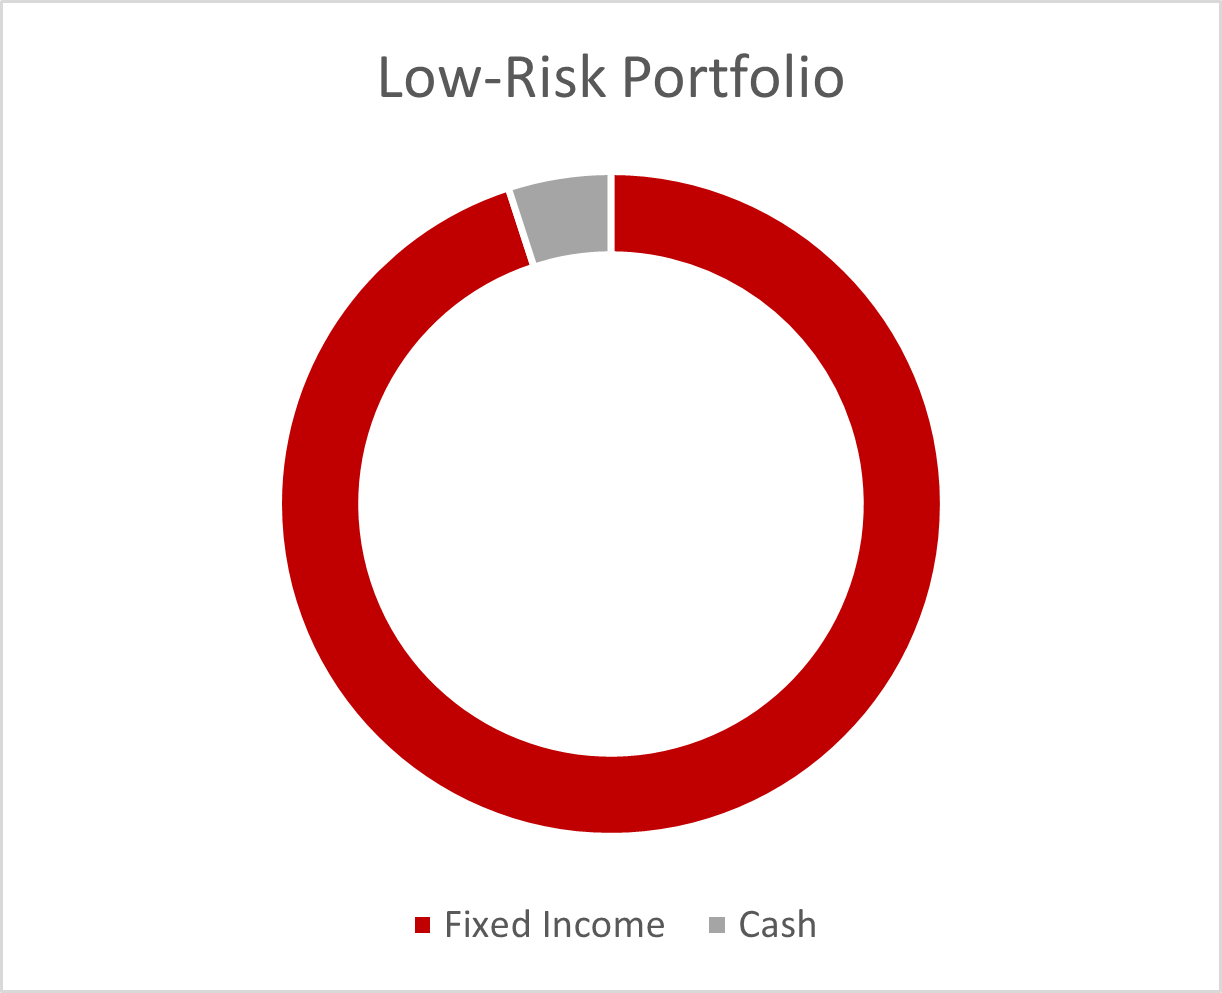 Low-risk portfolio, where 95% is fixed income and 5% is cash